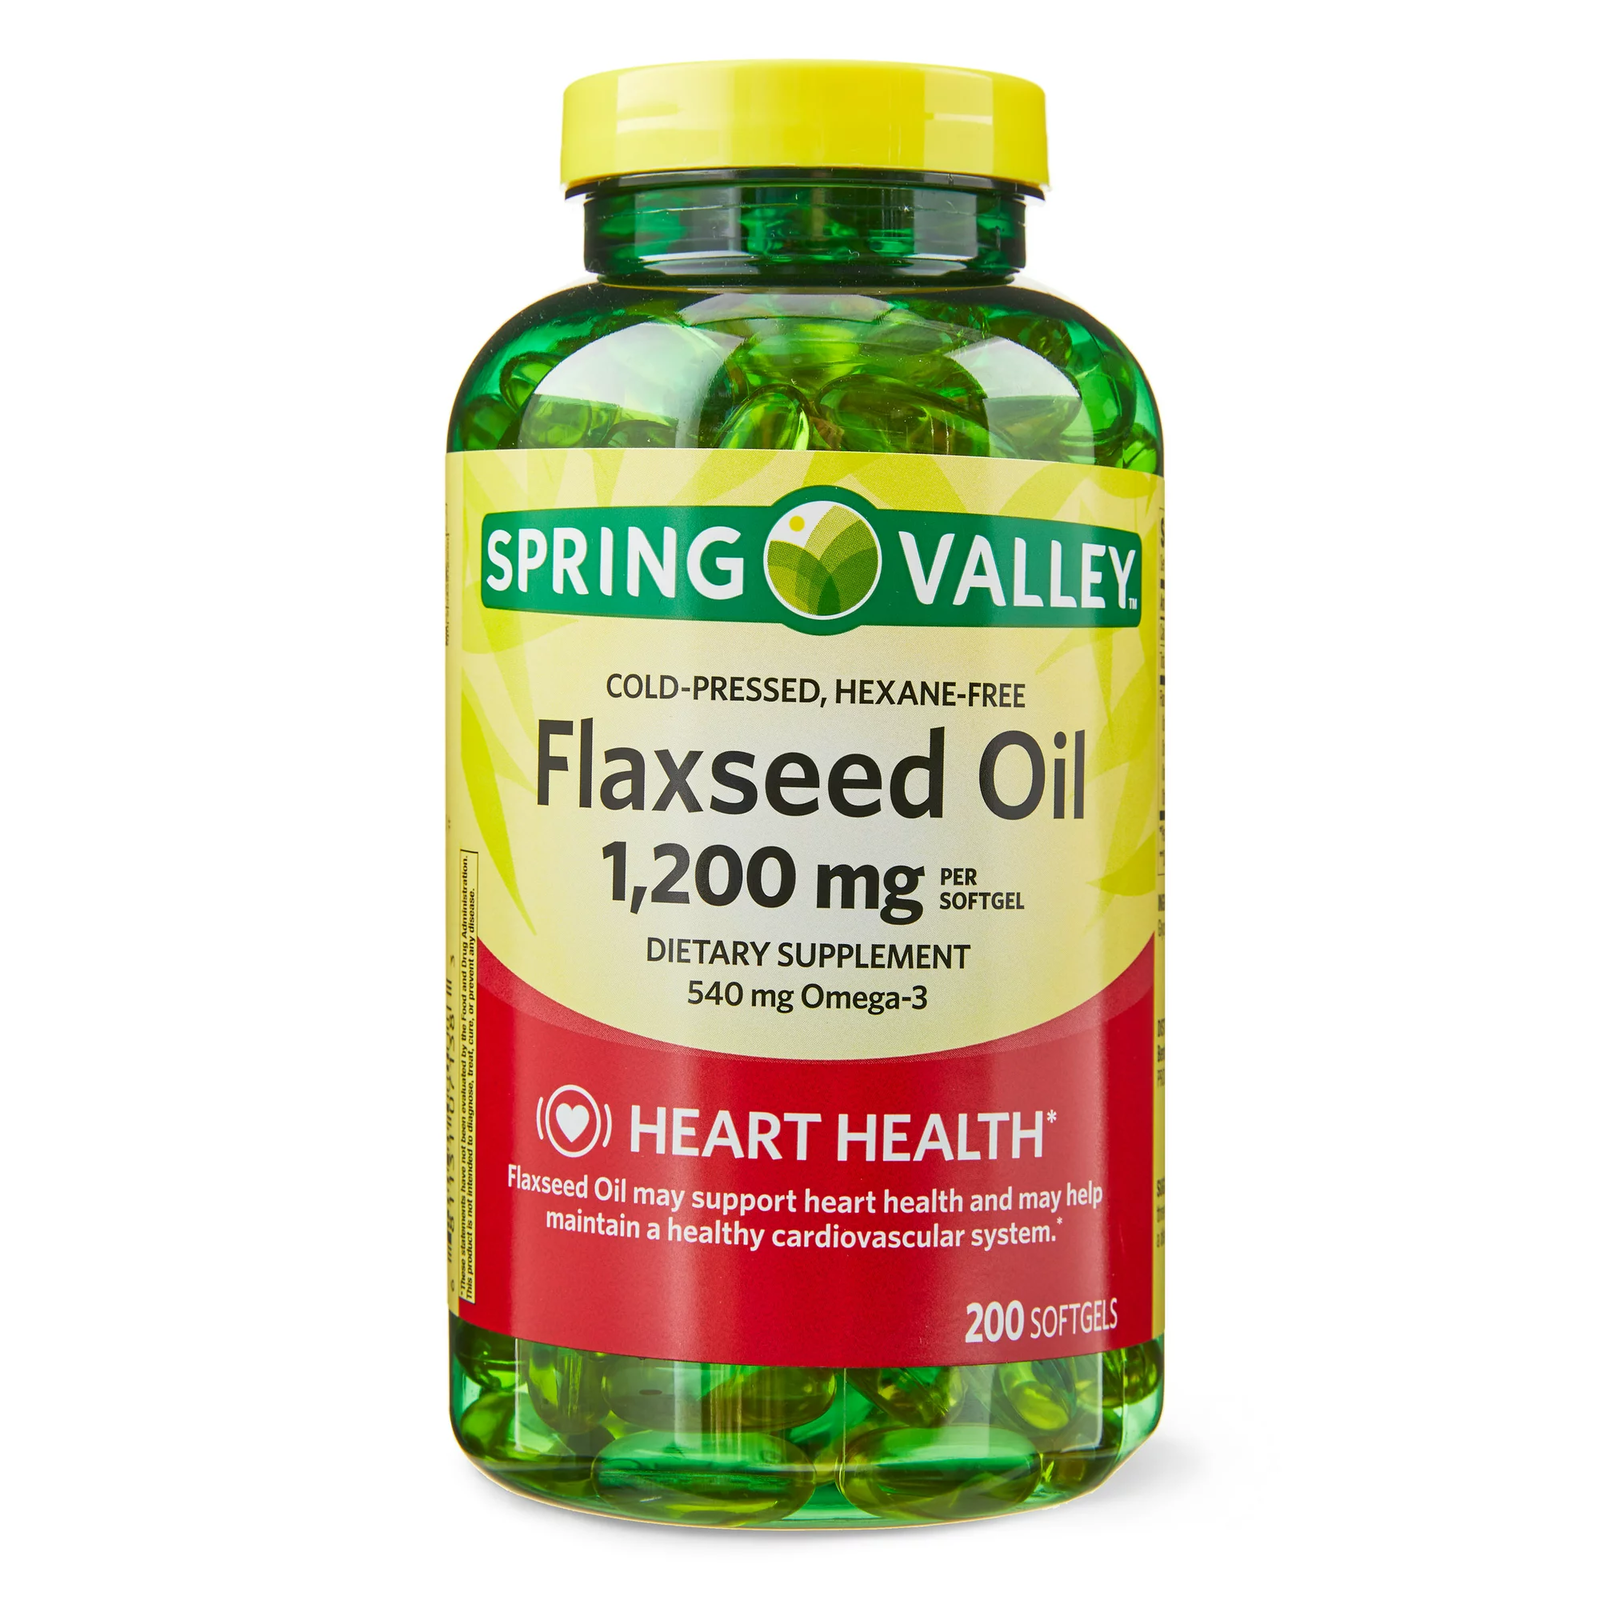 Spring Valley Flaxseed Oil Heart health, 1200 mg Dietary Supplement 200 Softgels - $26.89